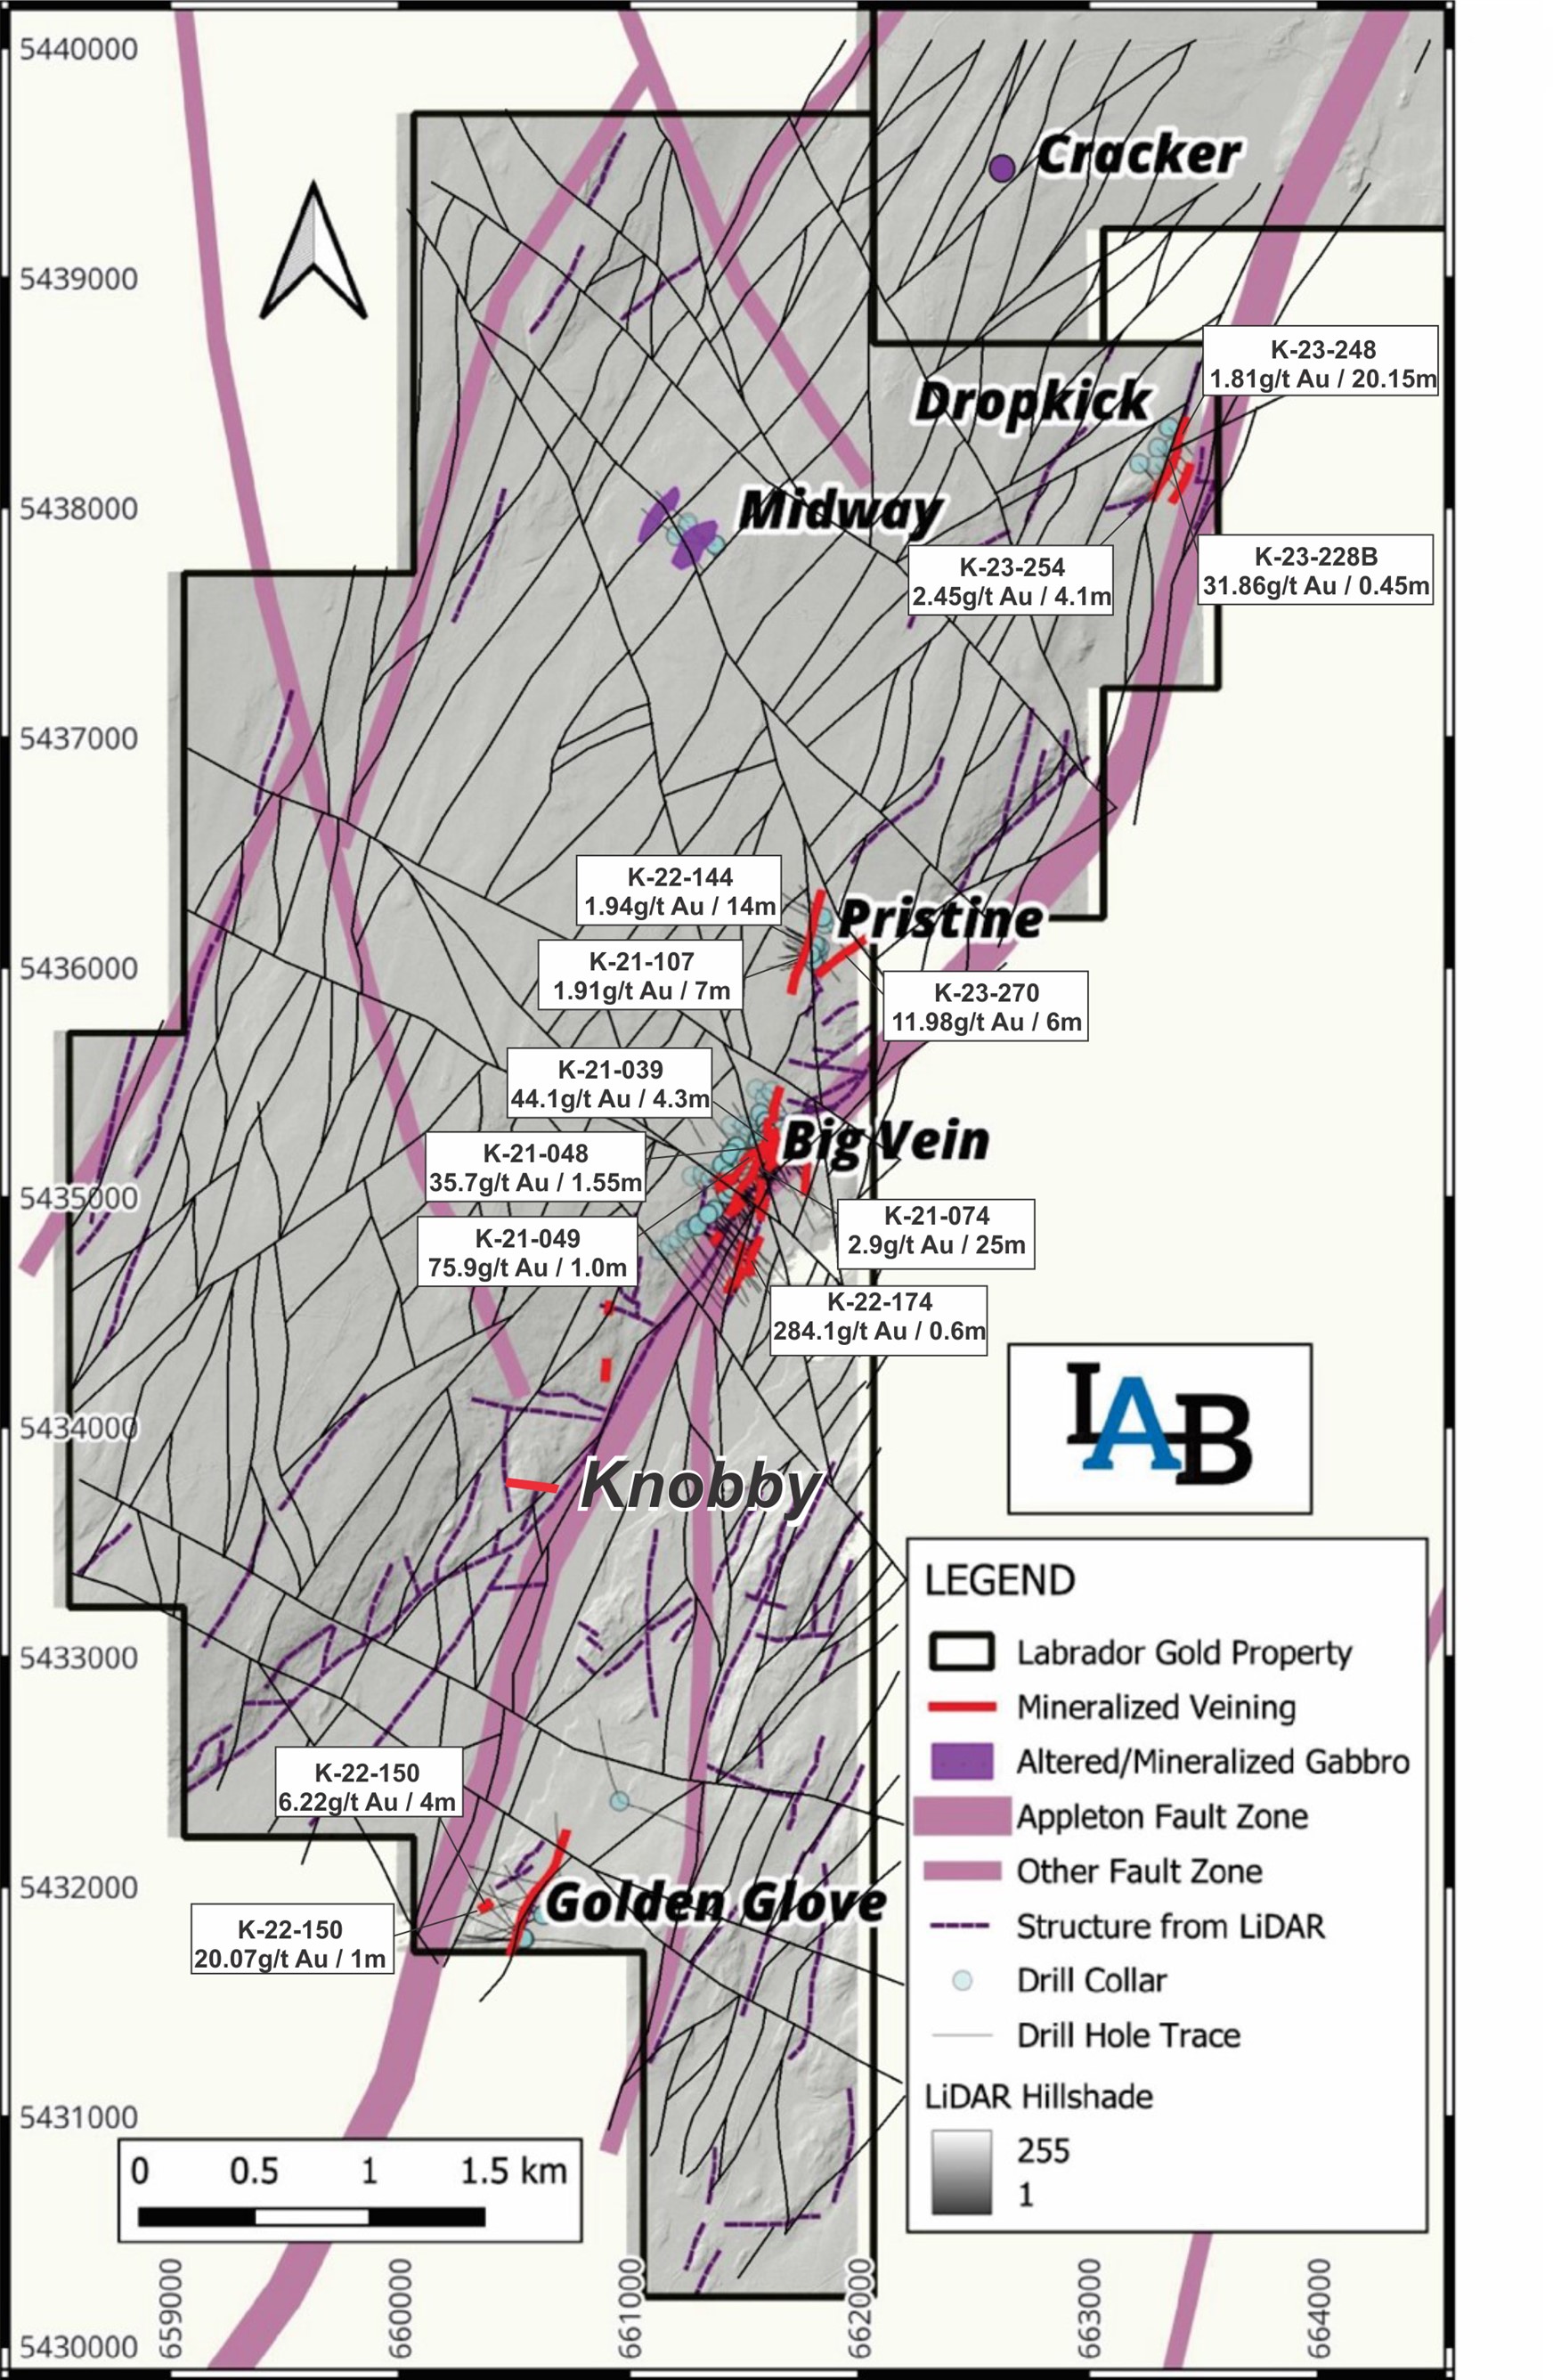 Plan map of occurrences with selected drill intersections along the Appleton Fault Zone.